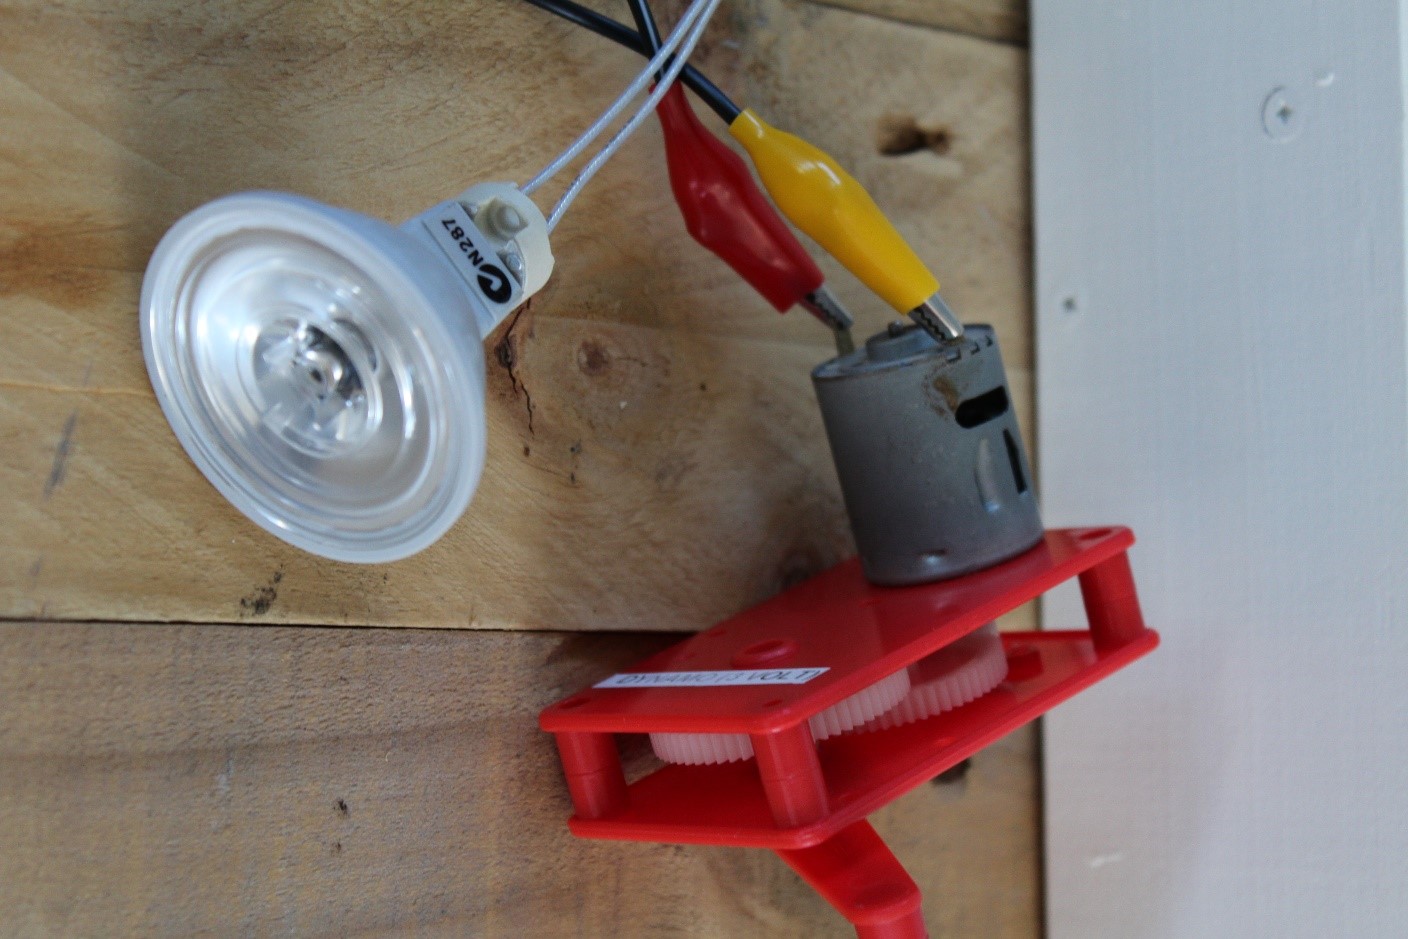 IMAGE: Hand powered dynamo connected to an LED light. Turning the arm of the dynamo generates electricity inside the little ‘motor’ (grey coloured cylindrical motor). The electricity from the dynamo can light up the LED light.